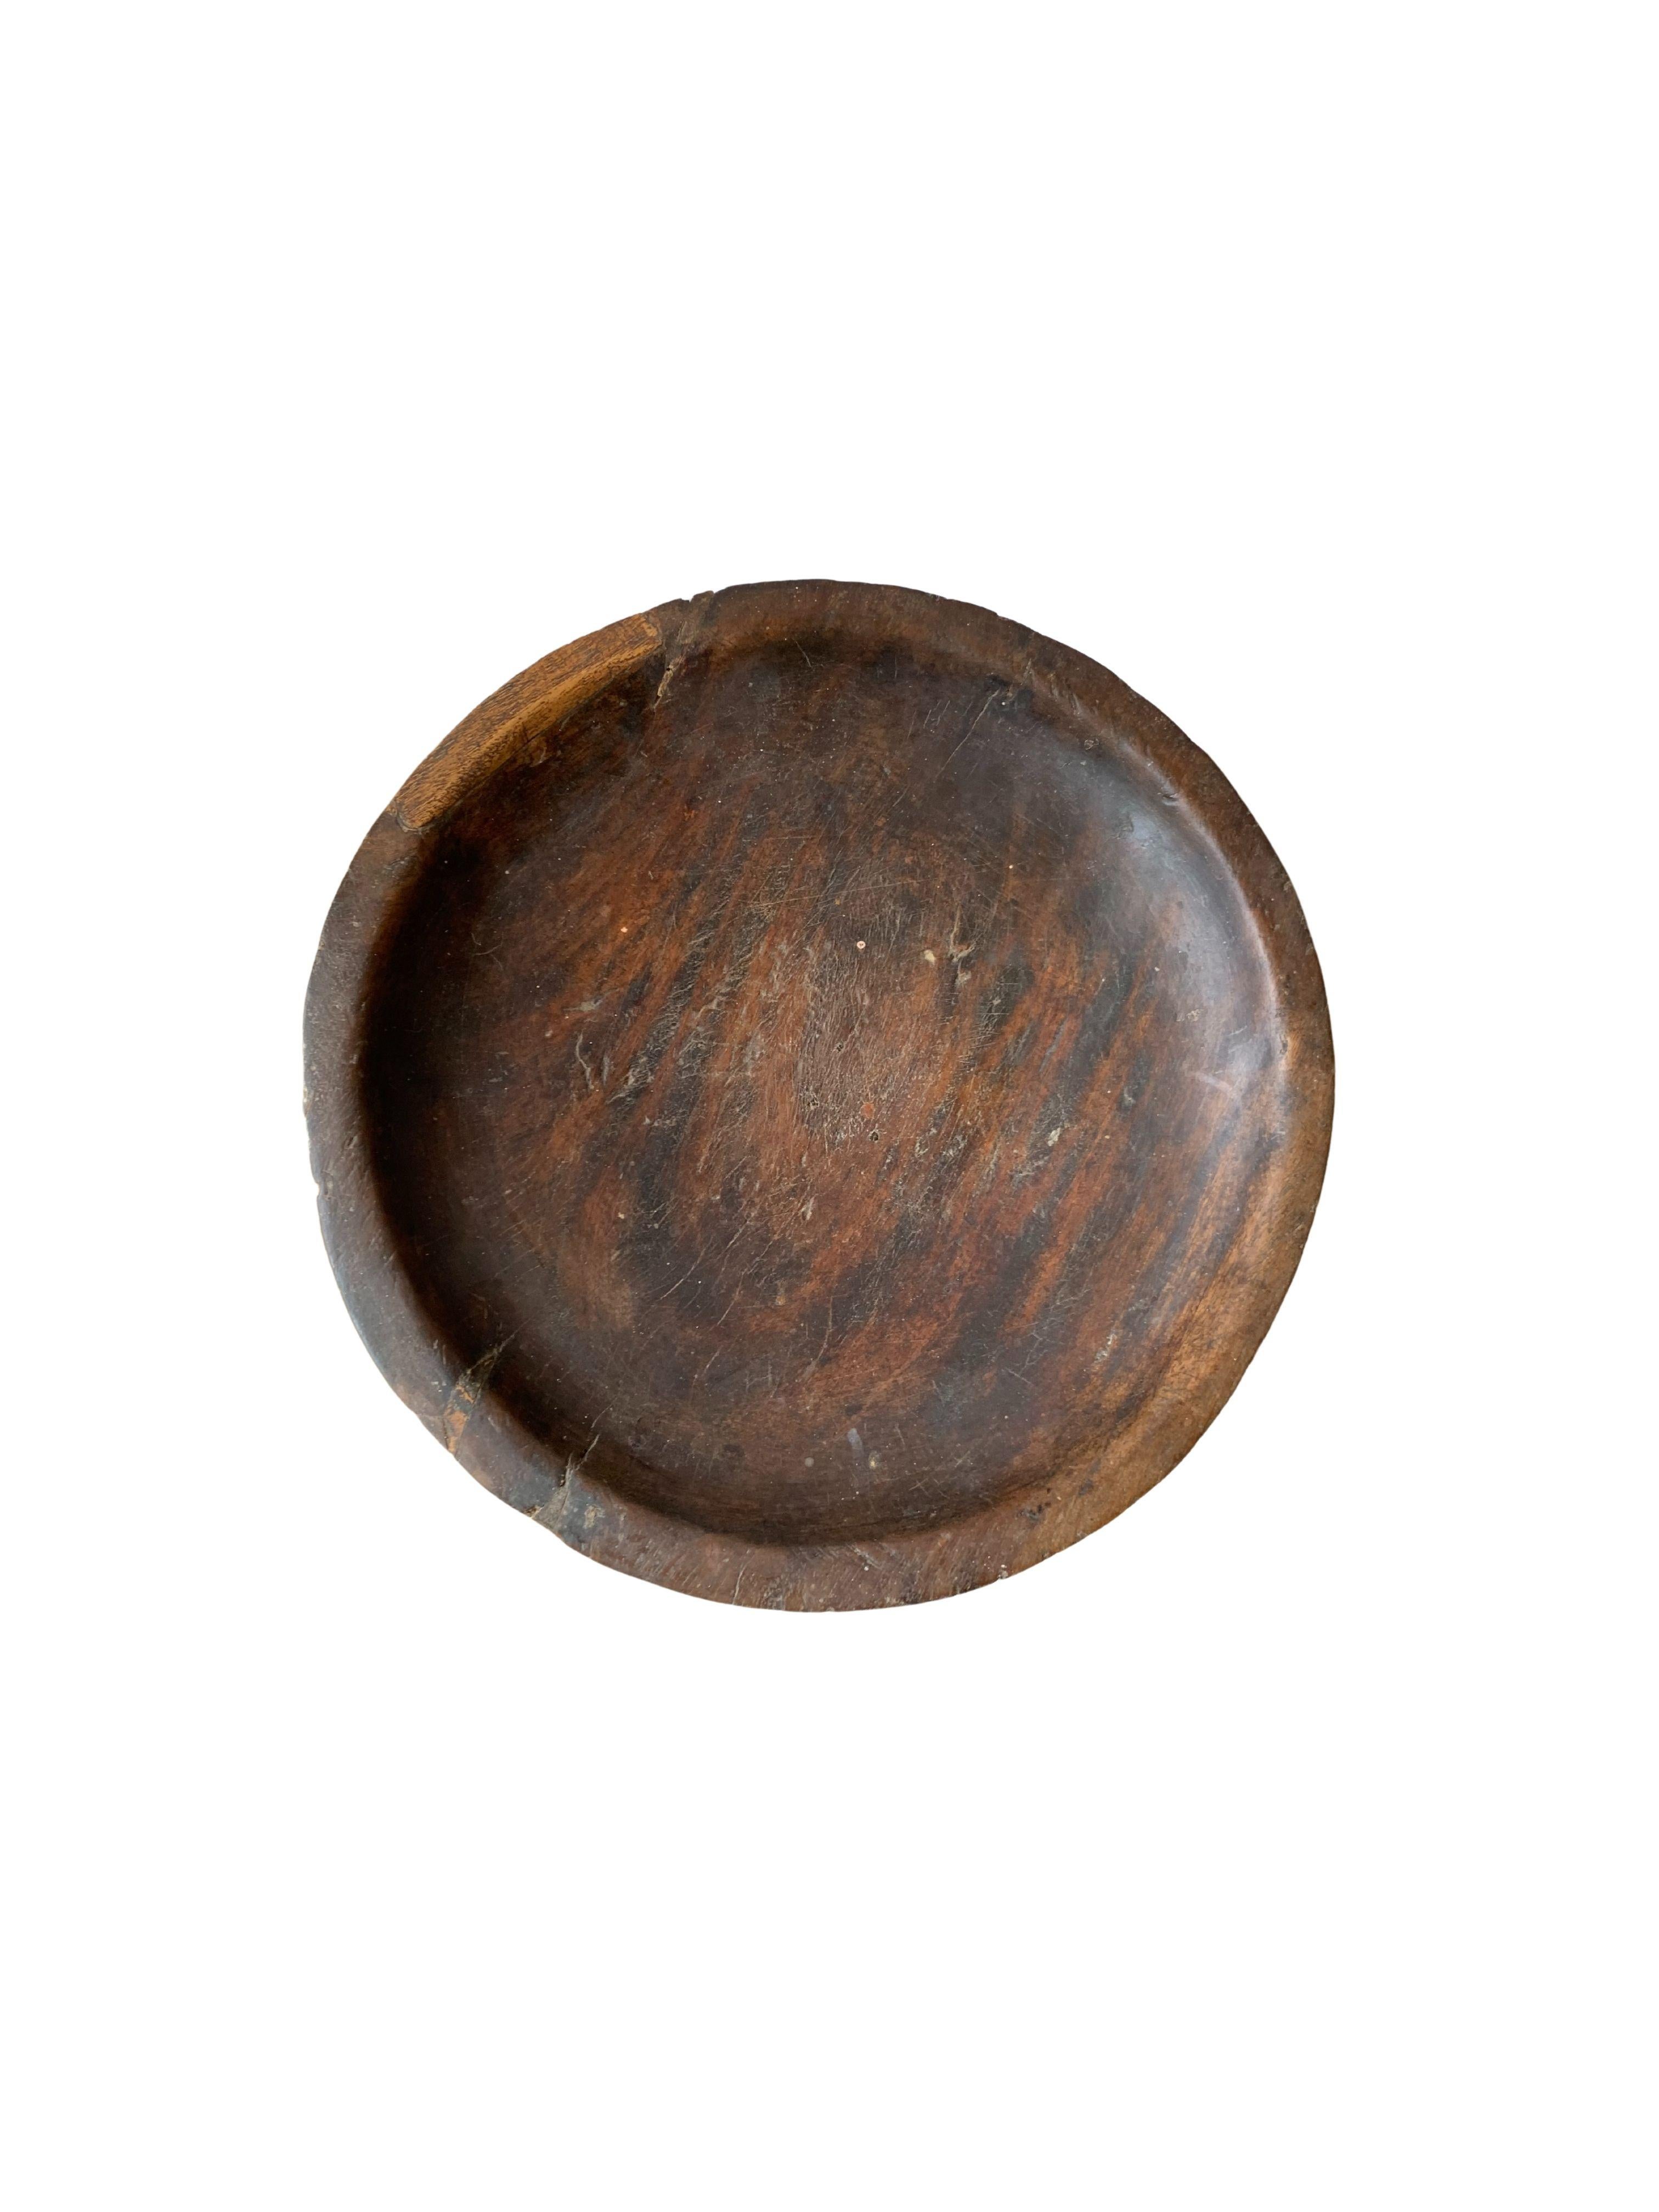 Other Batak Tribe Ceremonial Bowl from Jackfruit Wood, Early 20th Century For Sale